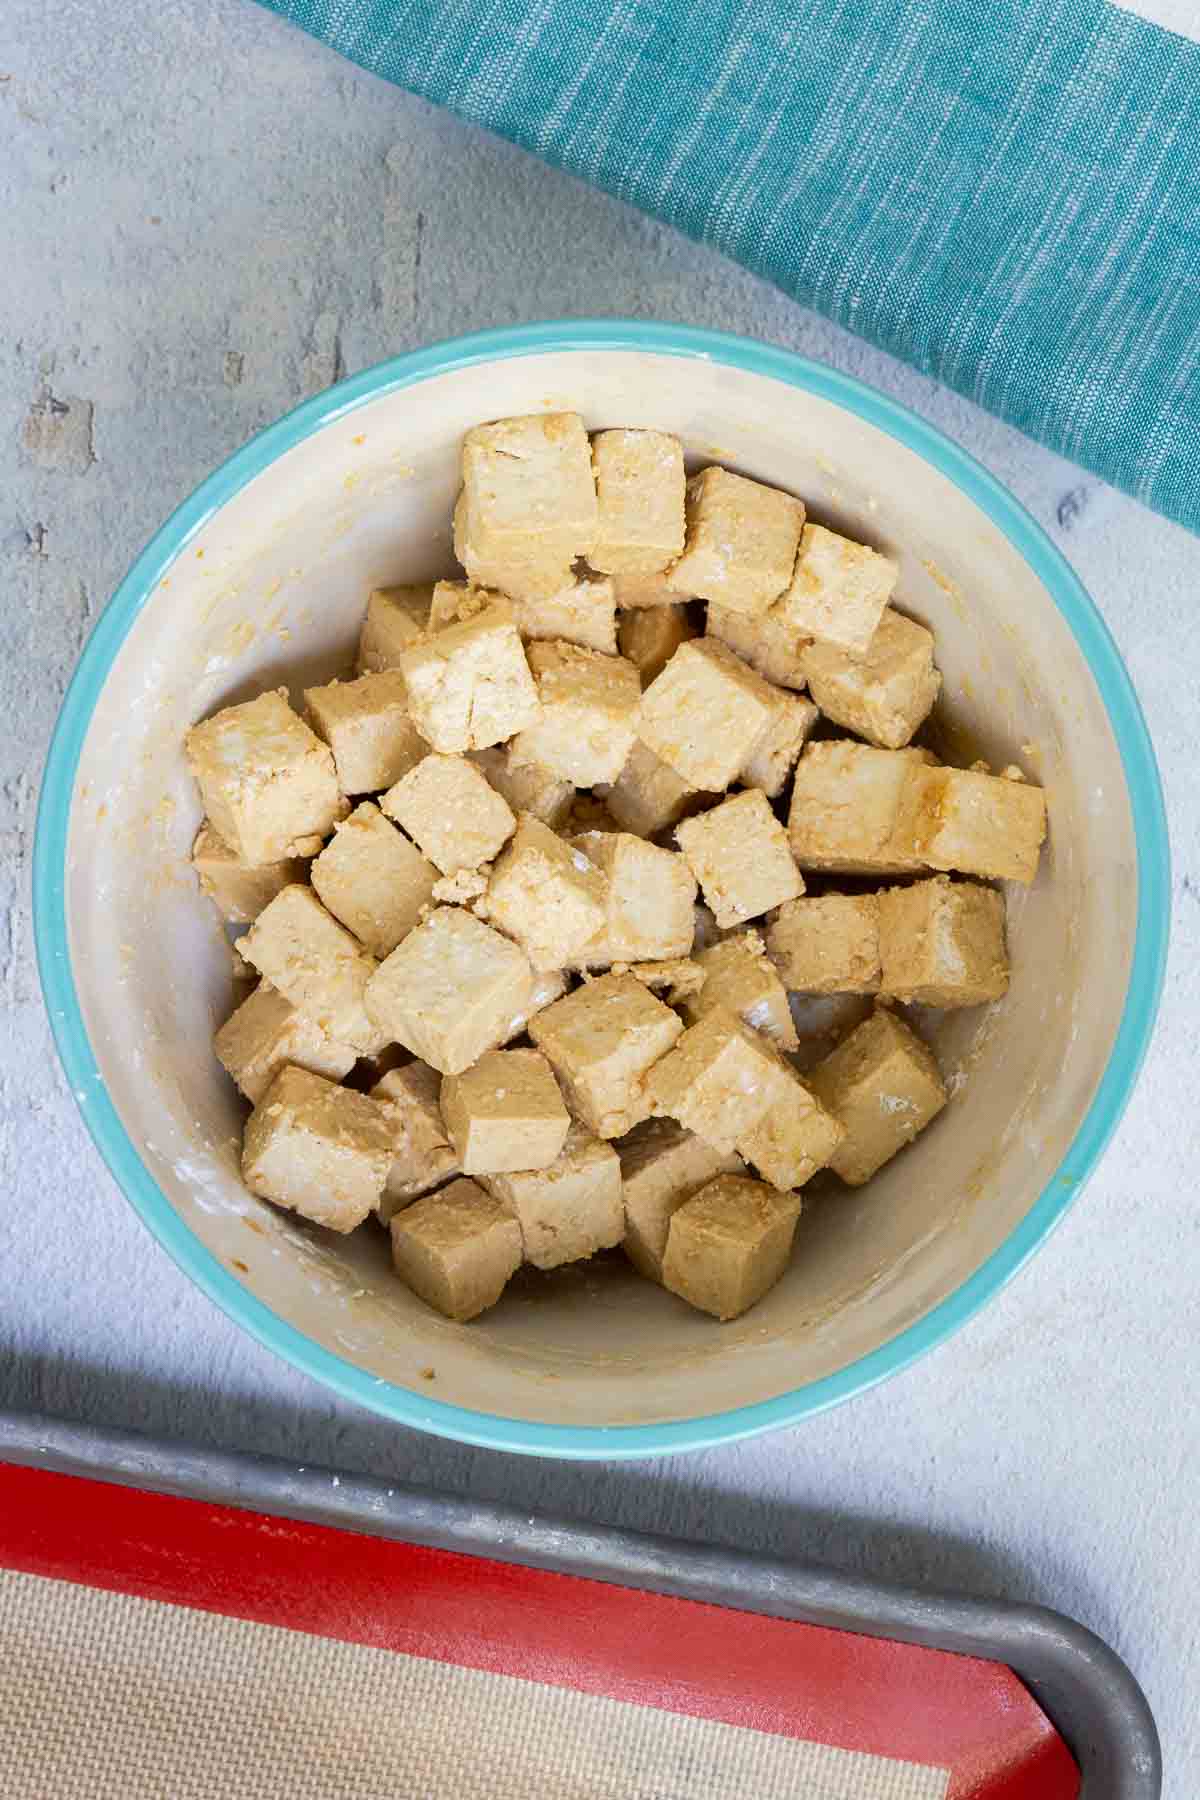 The marinated tofu is evenly coated in corn starch.